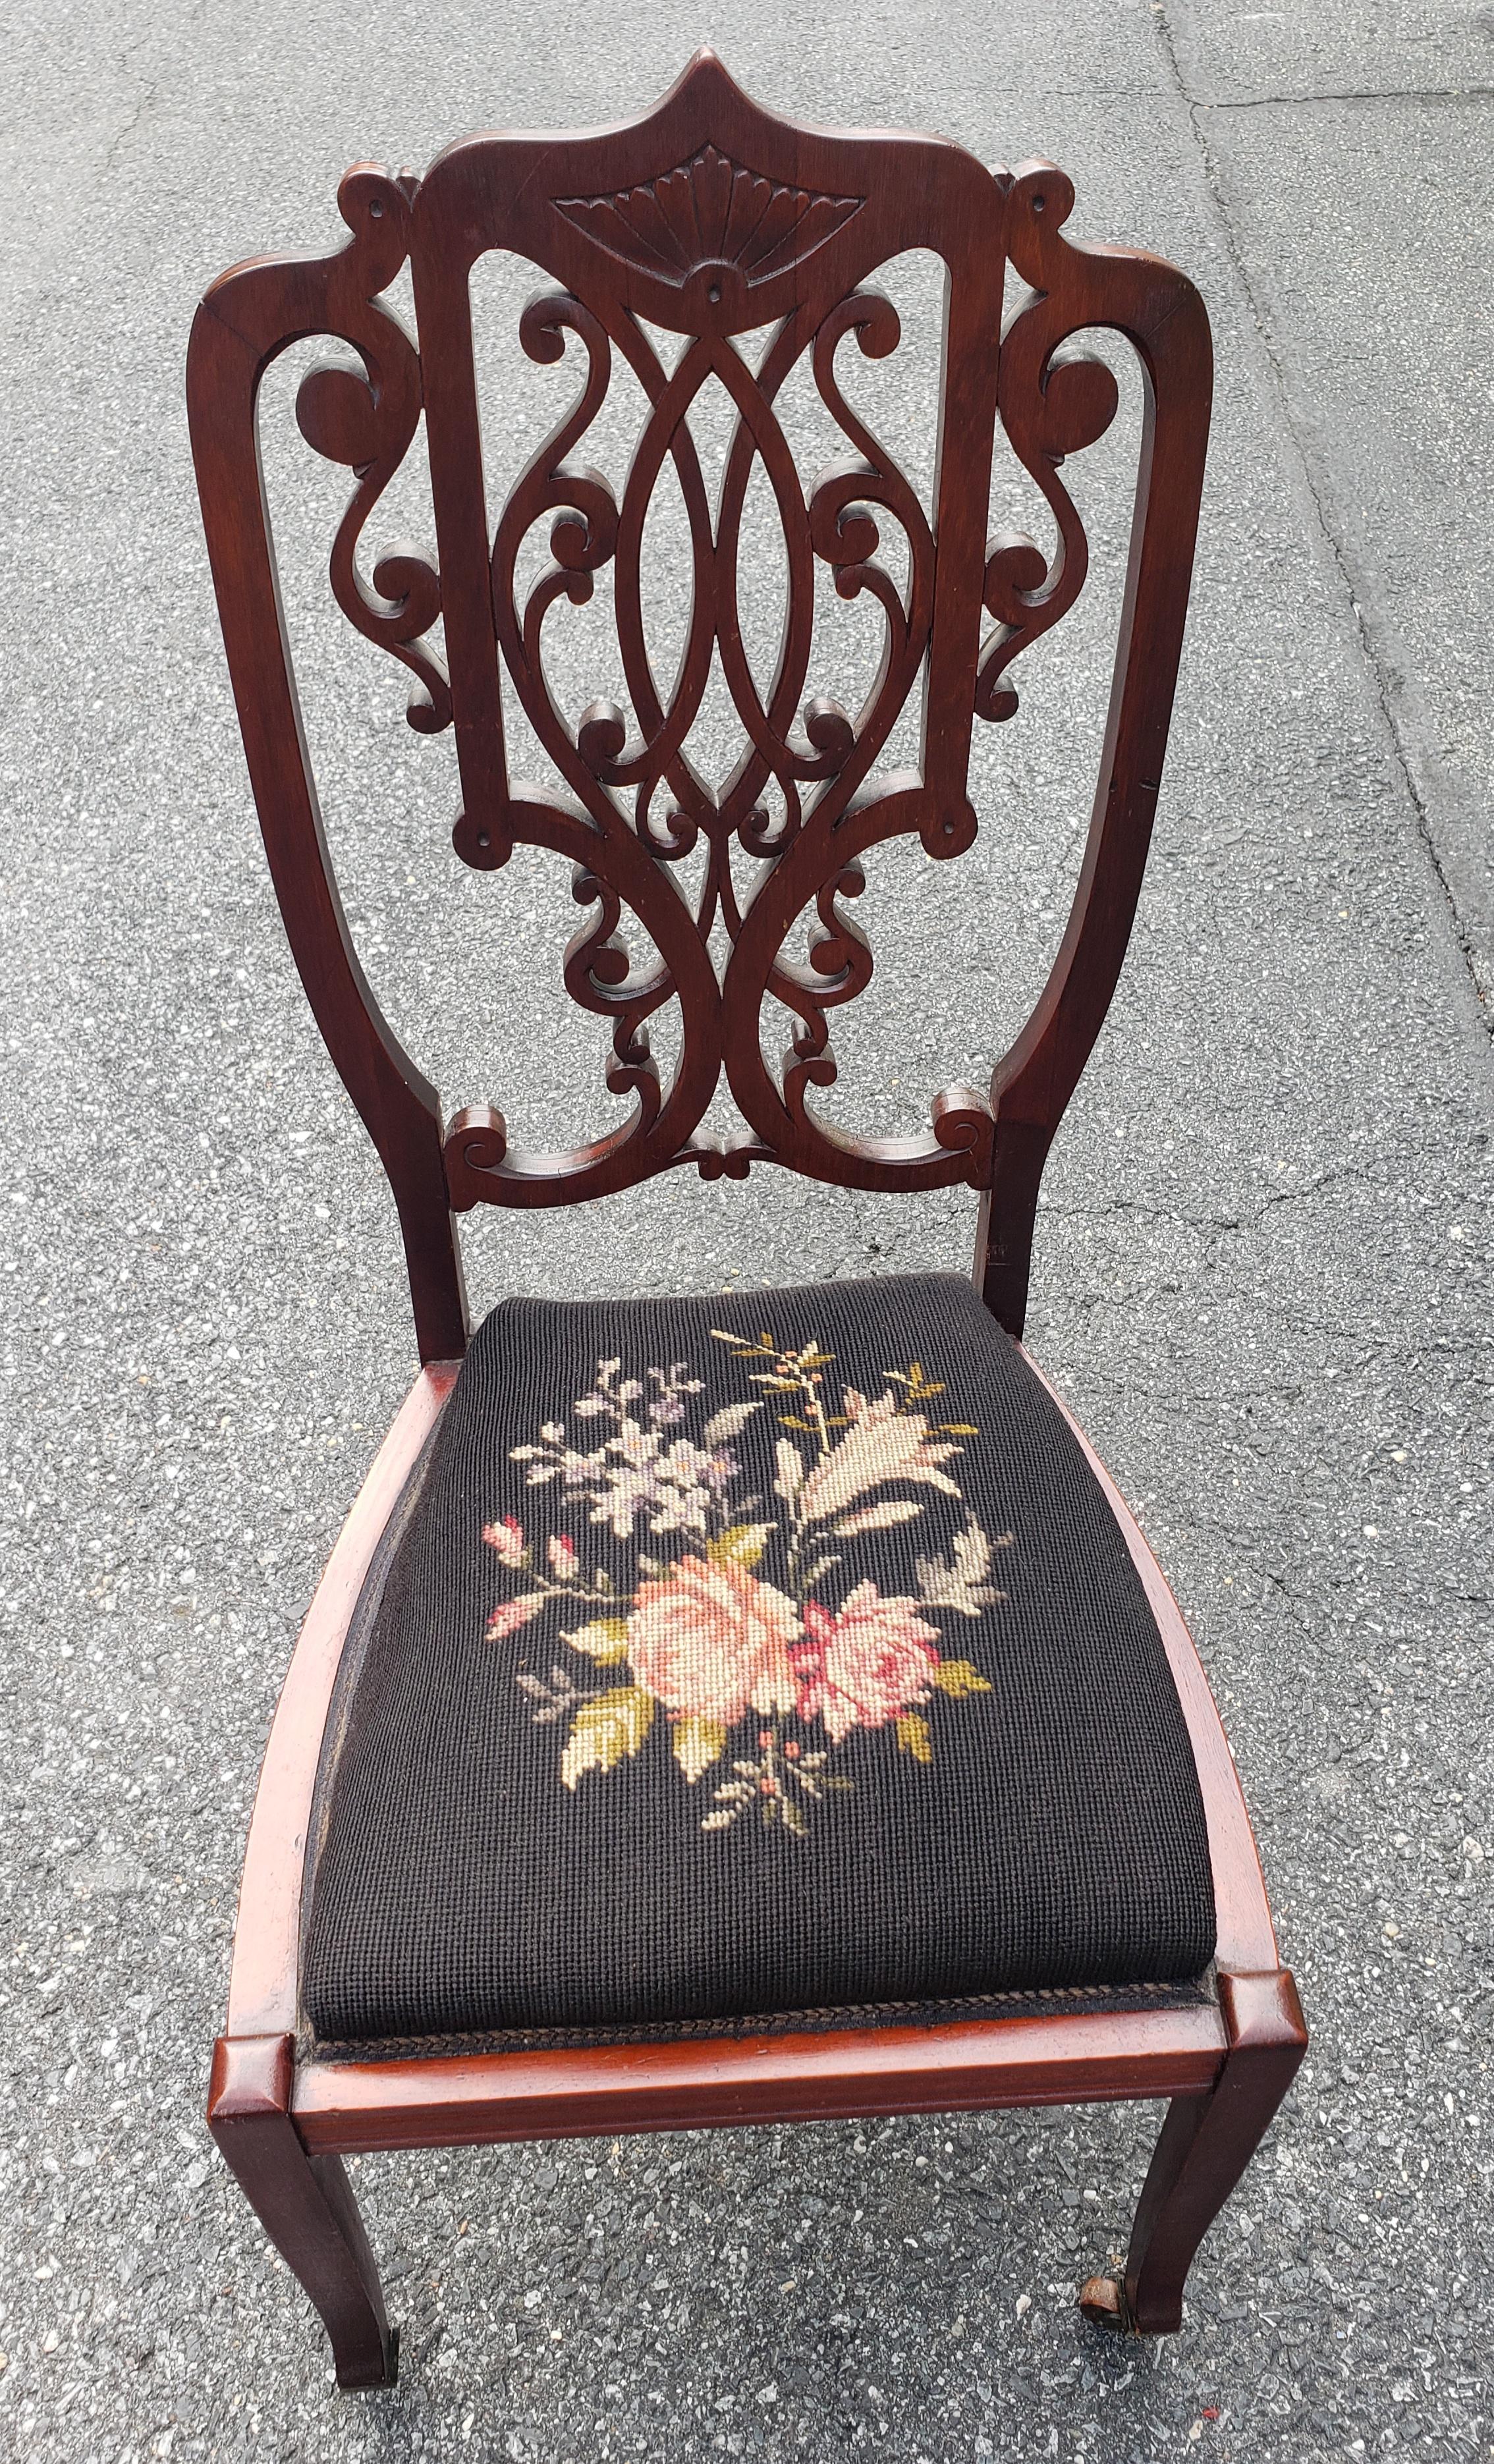 North American Late 19th C. Victorian Mahogany and Needlepoint Upholstered Side Chair on Wheels For Sale